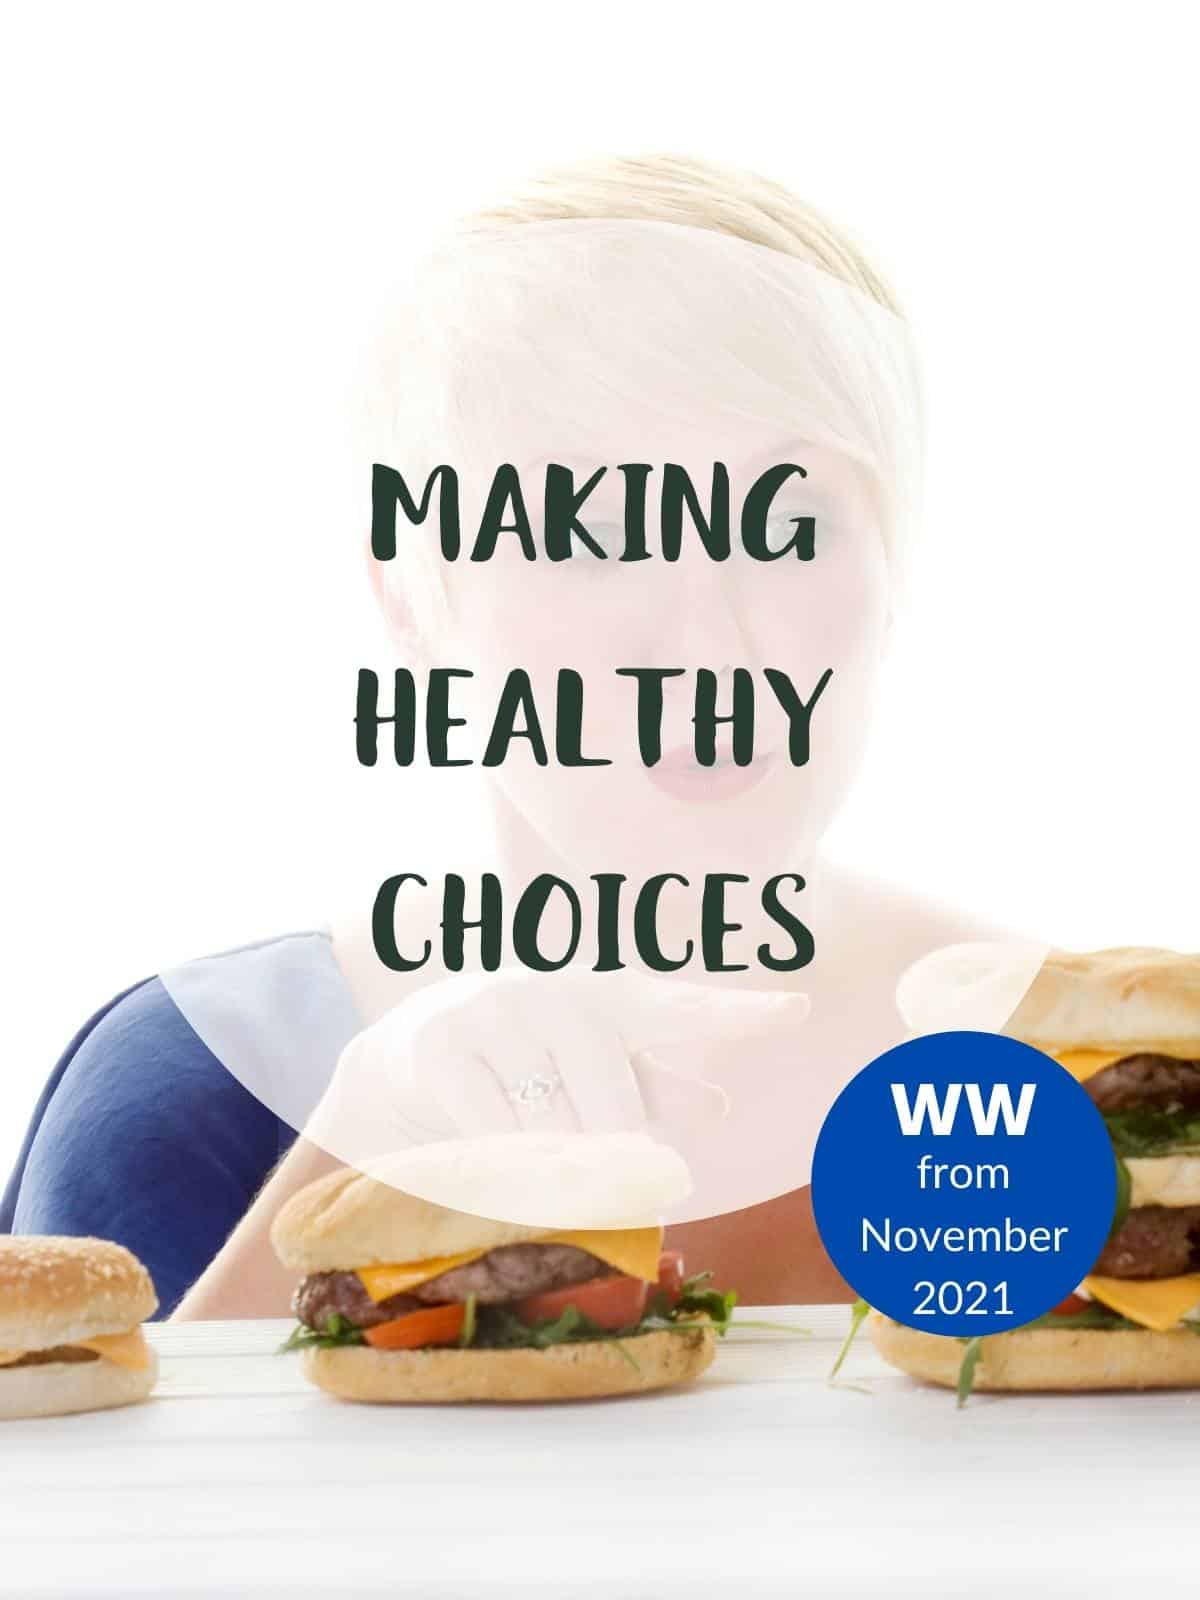 A picture of a woman pointing at a burger with text overlay stating 'Making Healthy Choices' WW from November 2021.